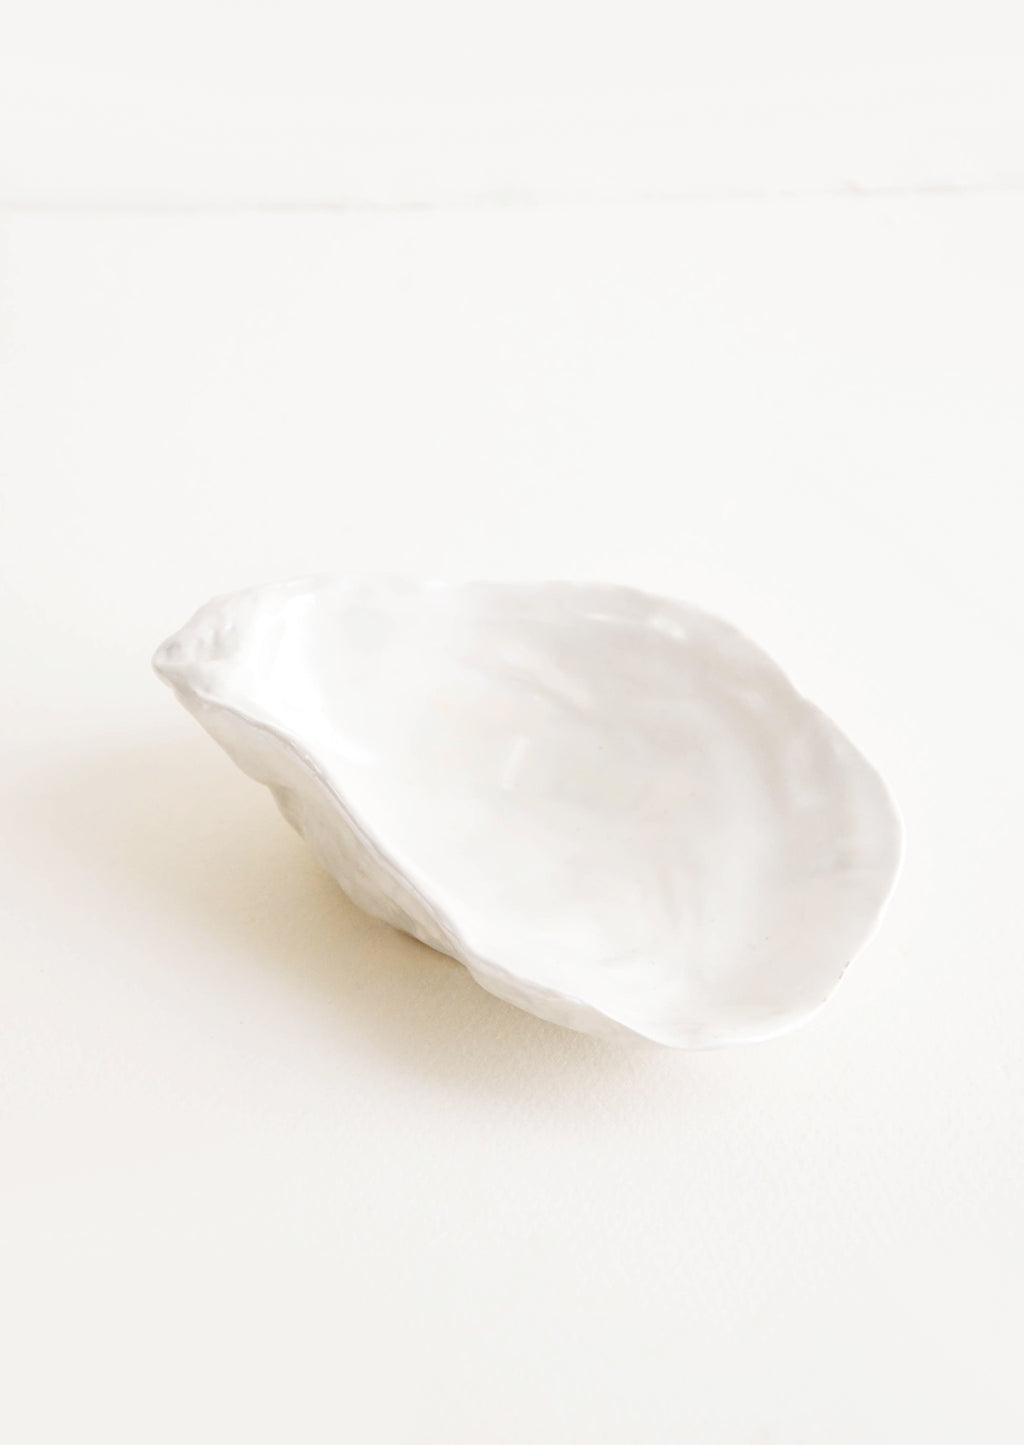 1: A small ceramic dish molded in the shape of an oyster half shell